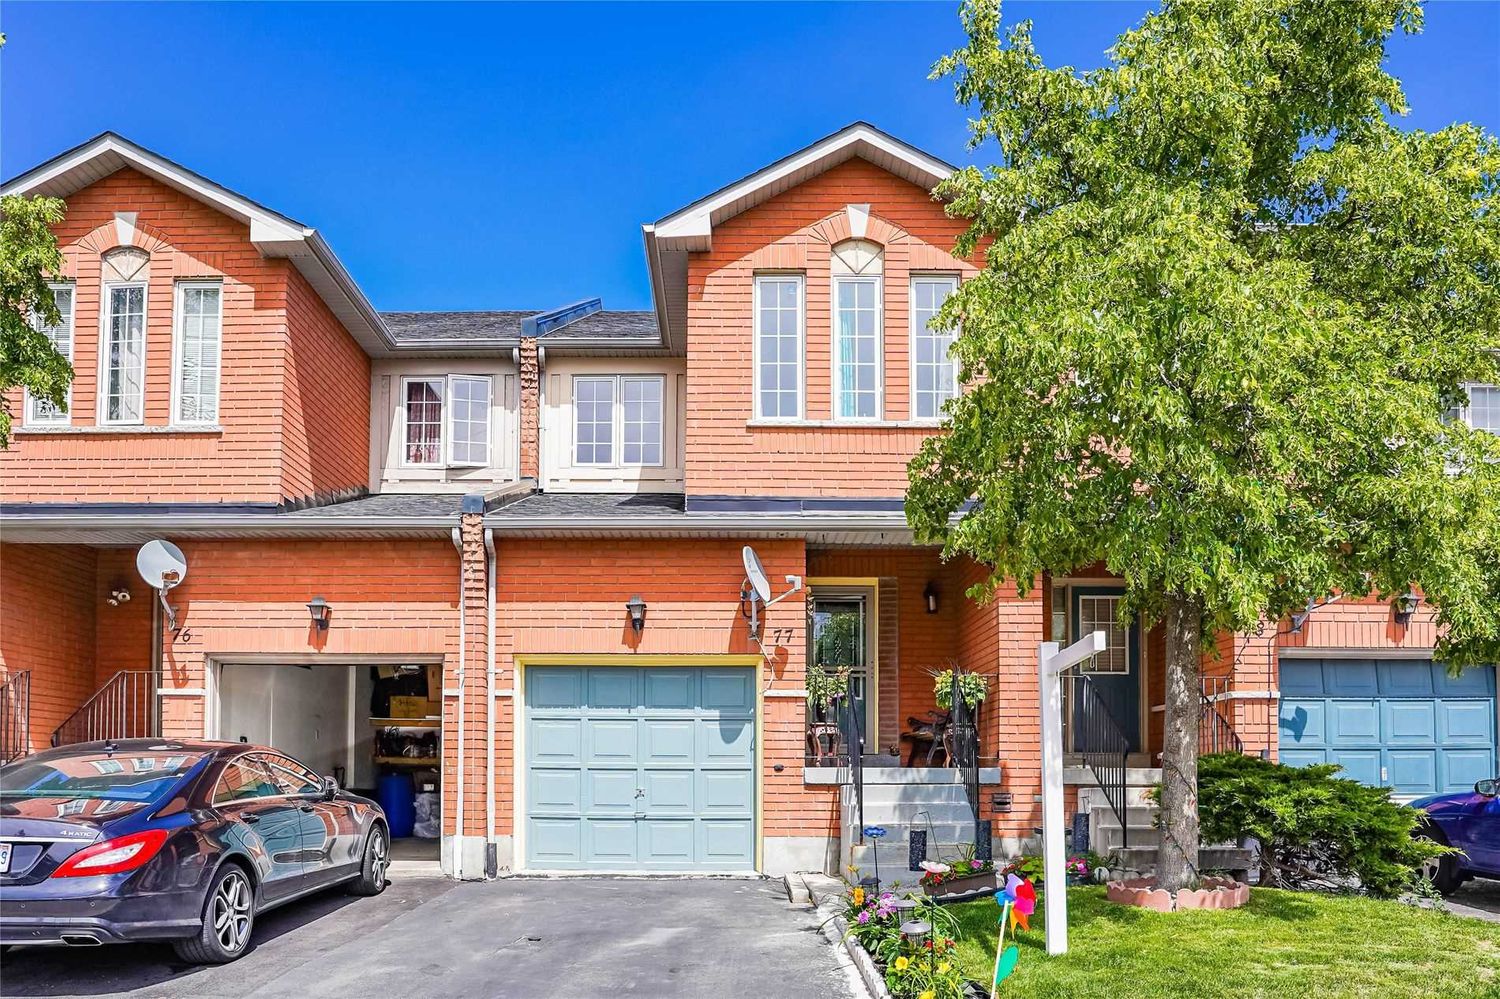 7115 Rexwood Road. 7115 Rexwood Road Townhomes is located in  Mississauga, Toronto - image #1 of 2